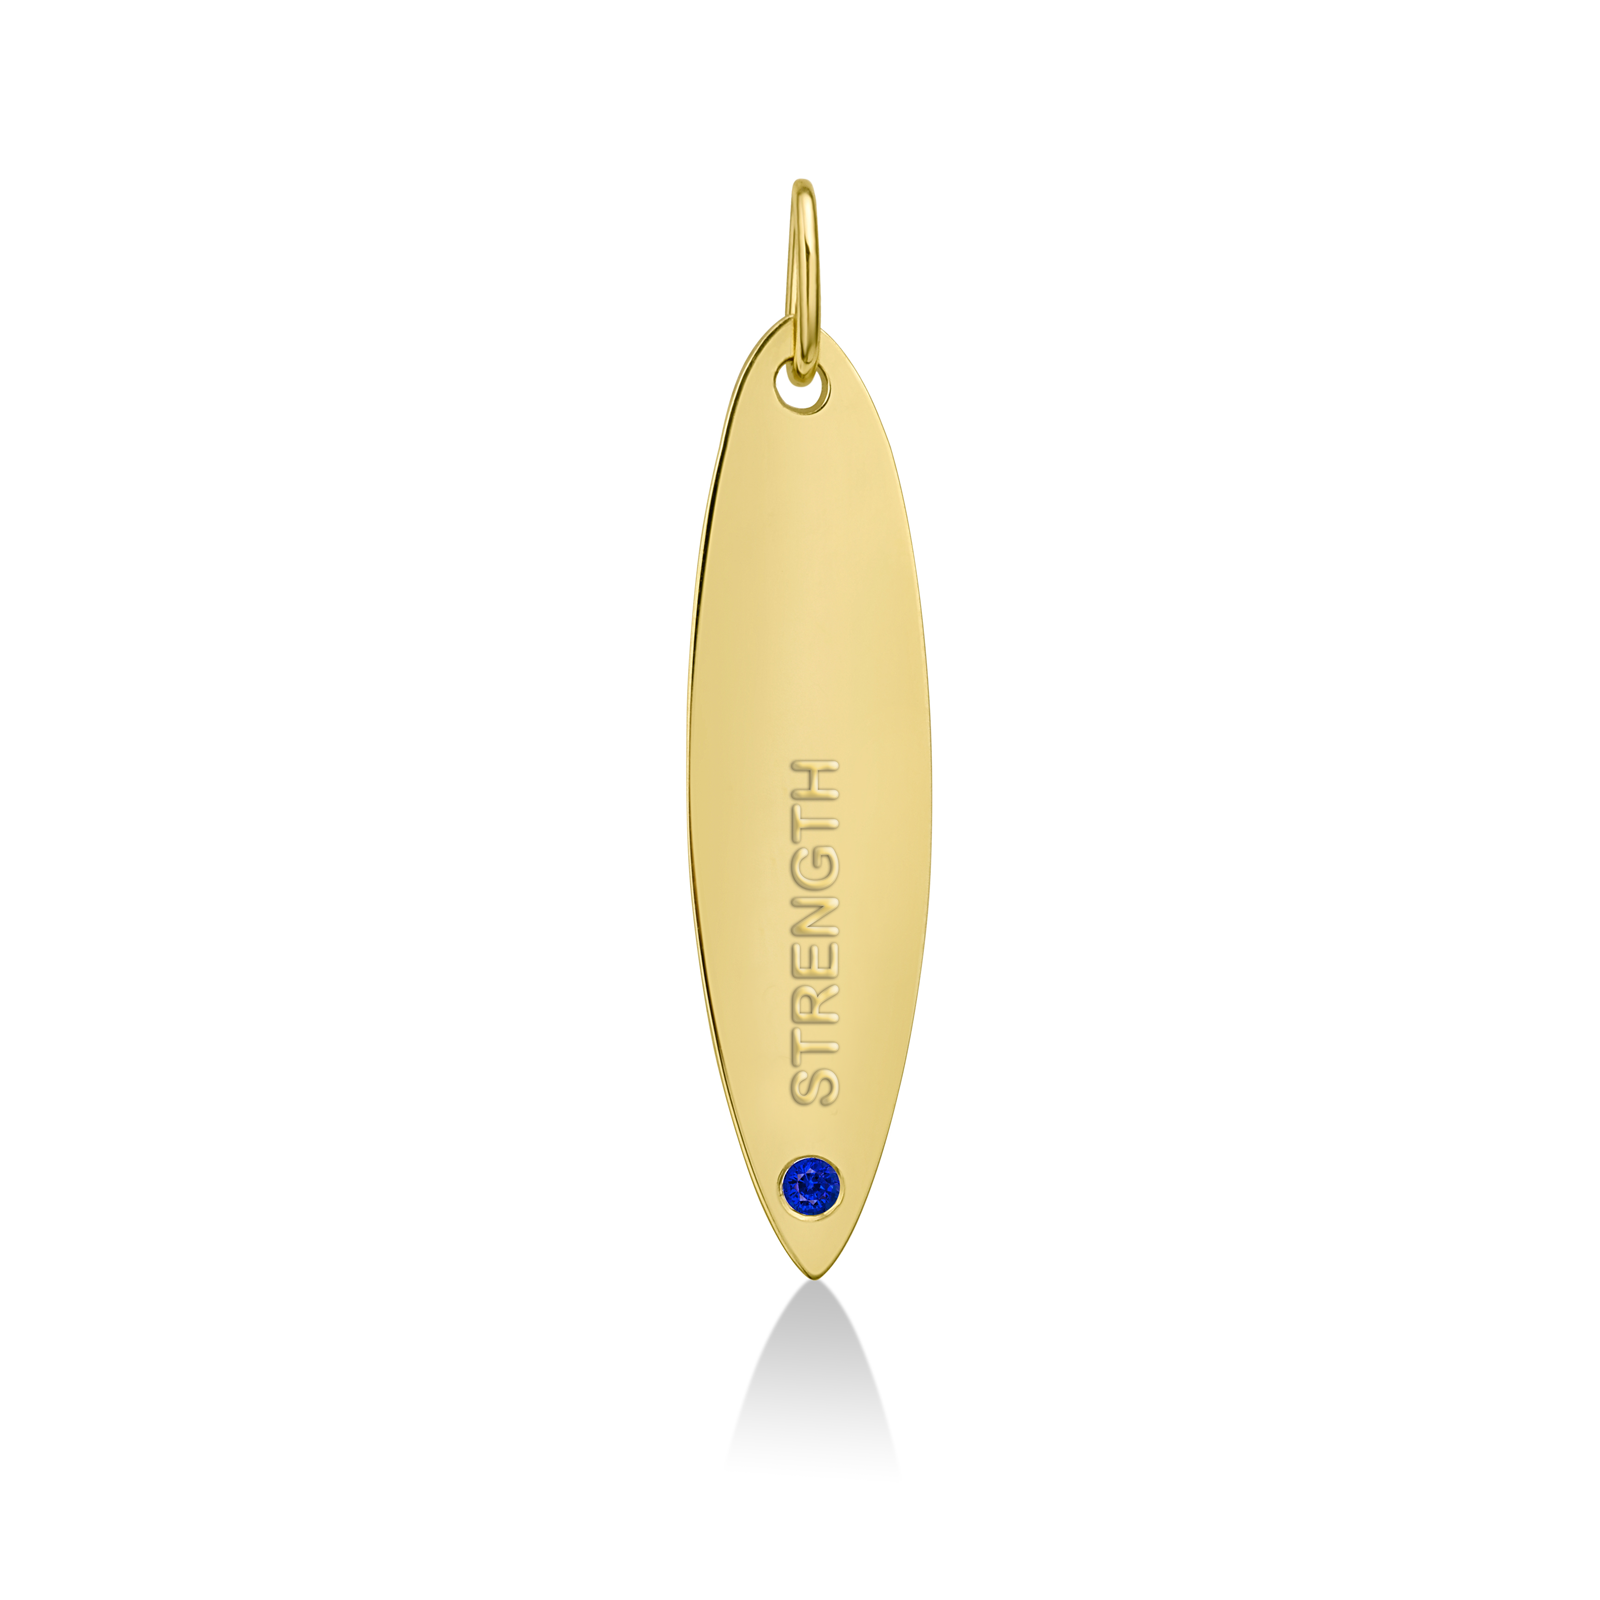 14k gold surfboard charm lock with STRENGTH engraved and sapphire